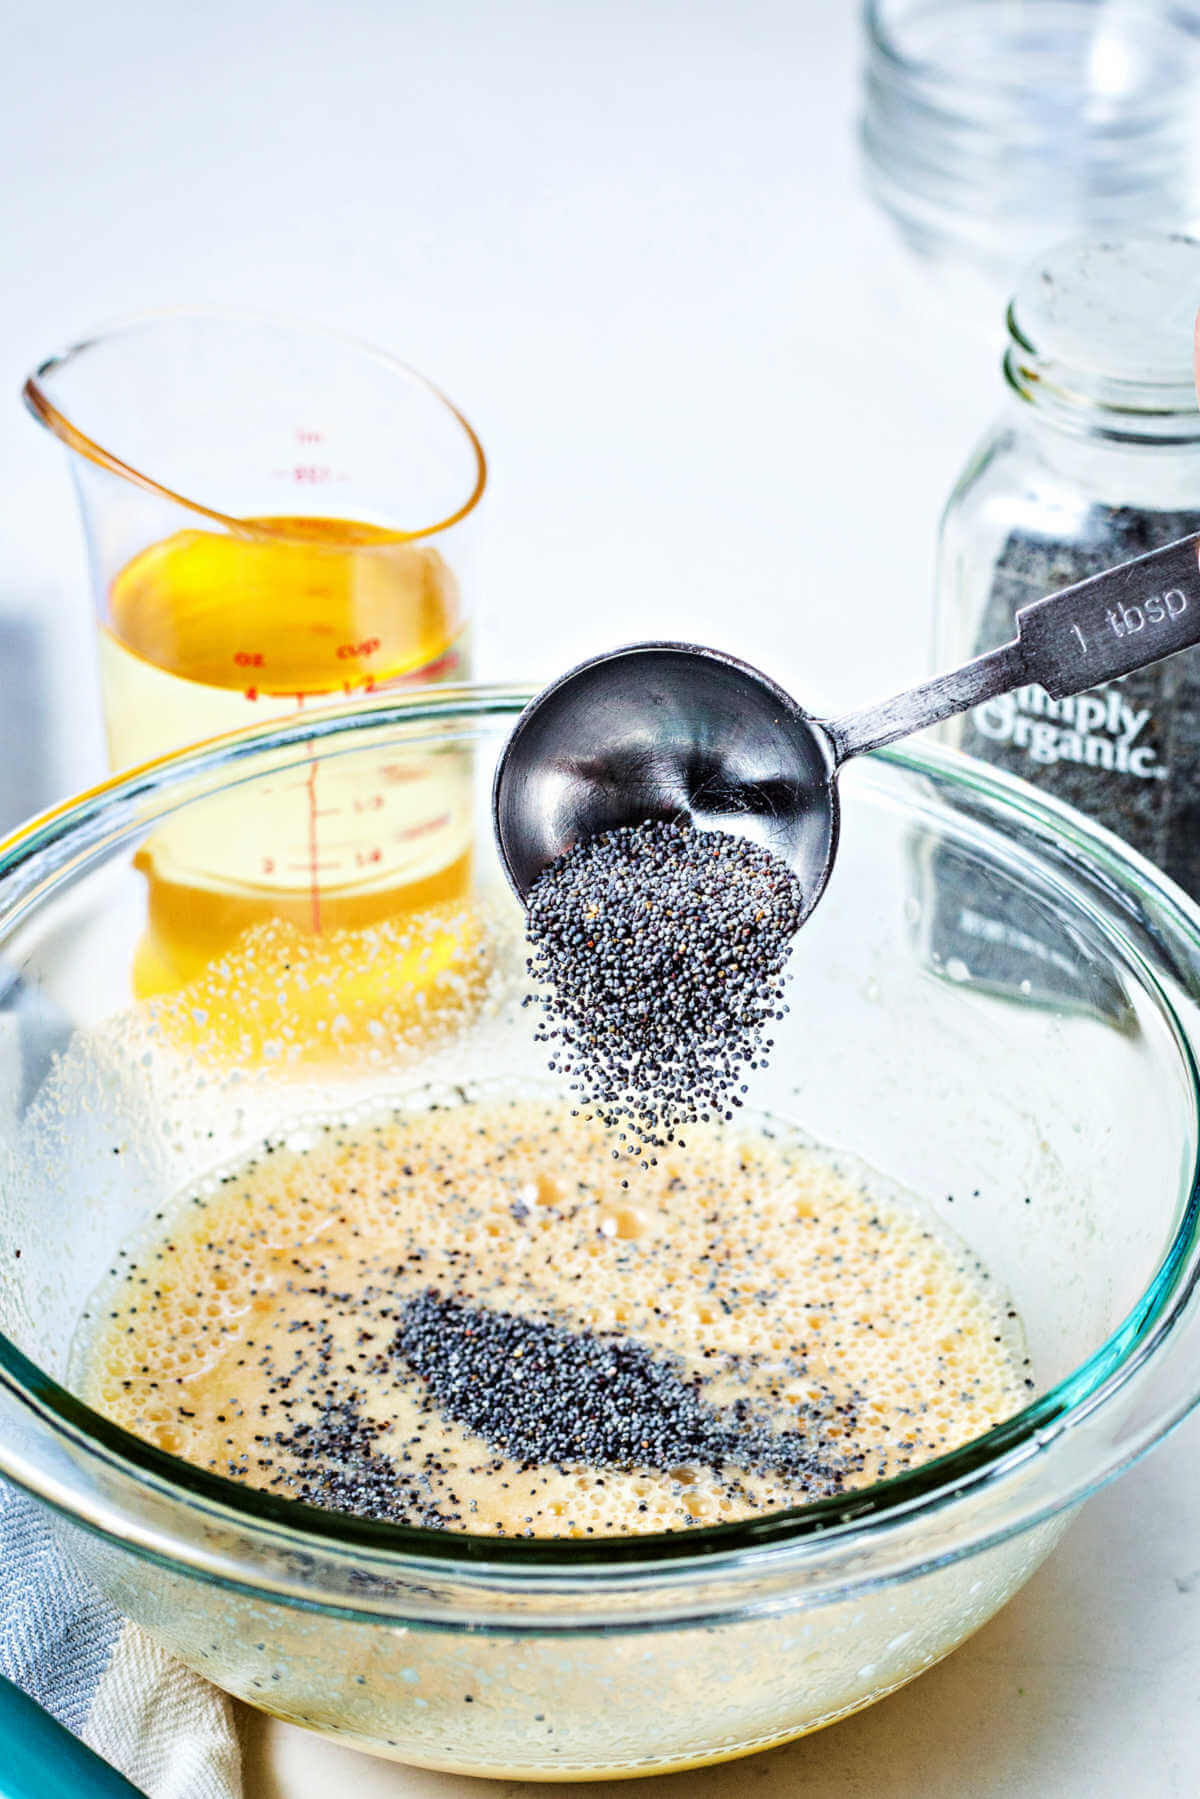 a tablespoon of poppy seeds being added into a bowl of dressing.